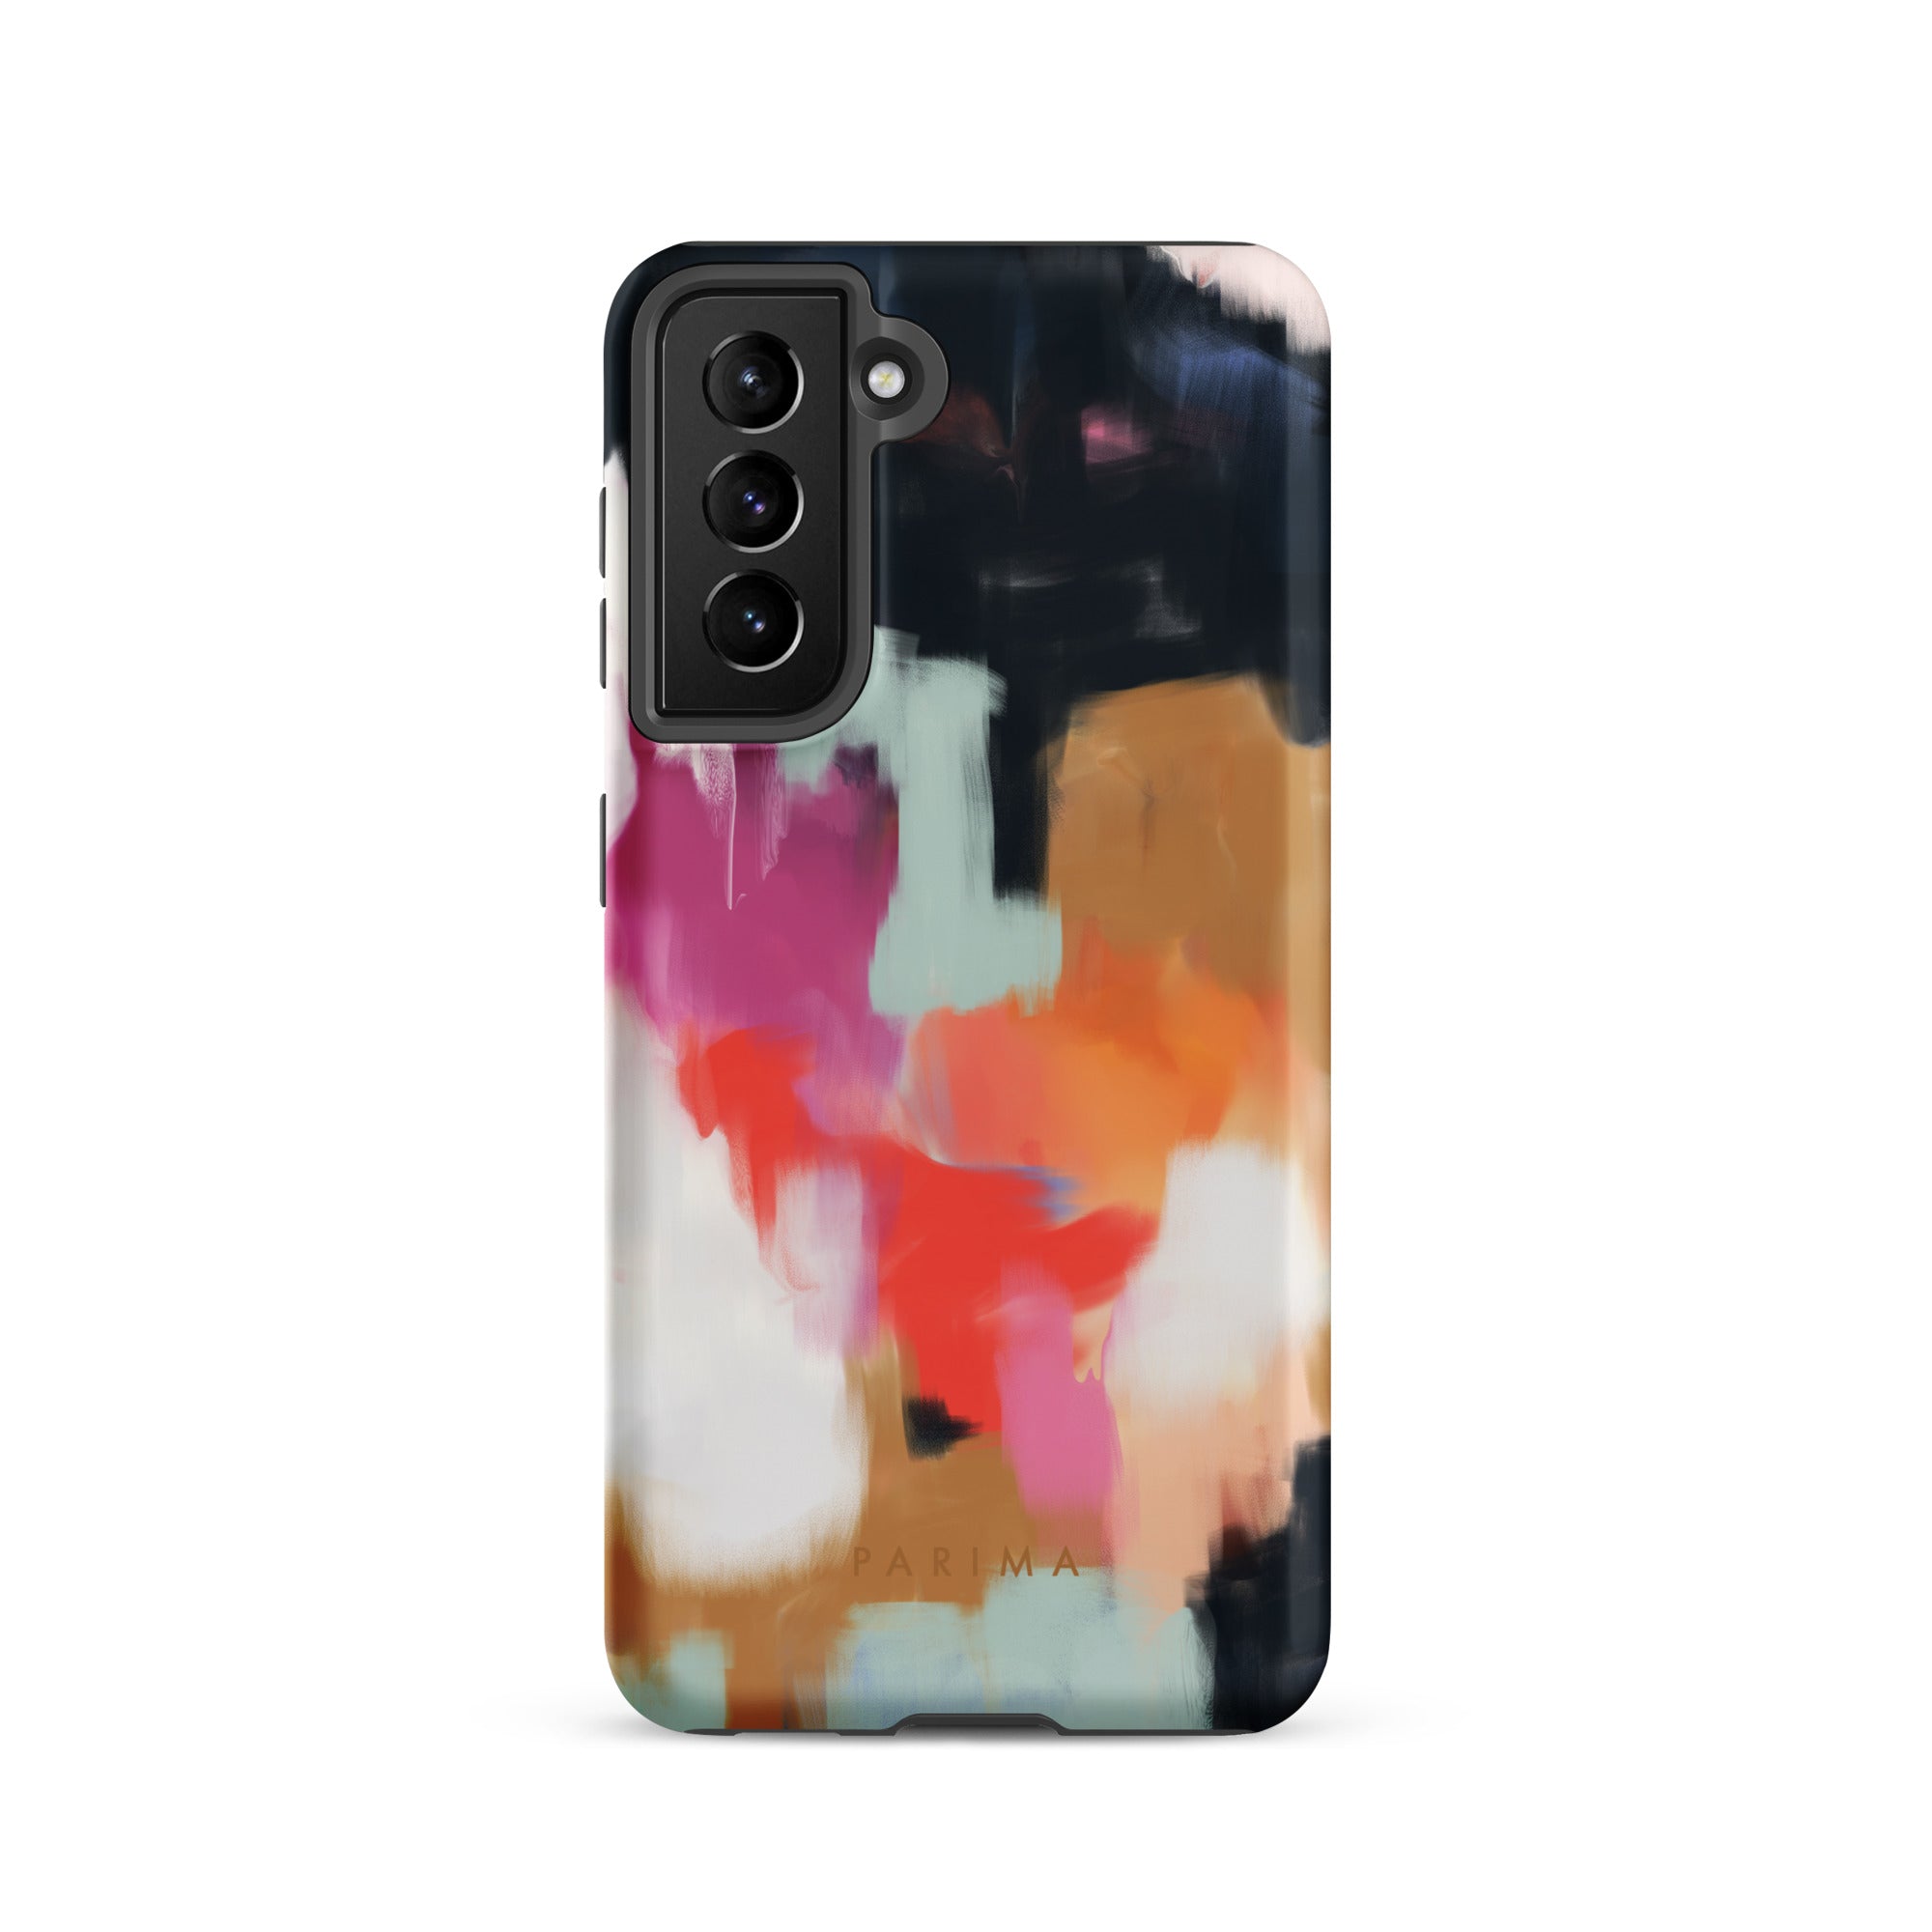 Ruthie, blue and pink abstract art on Samsung Galaxy S21 tough case by Parima Studio